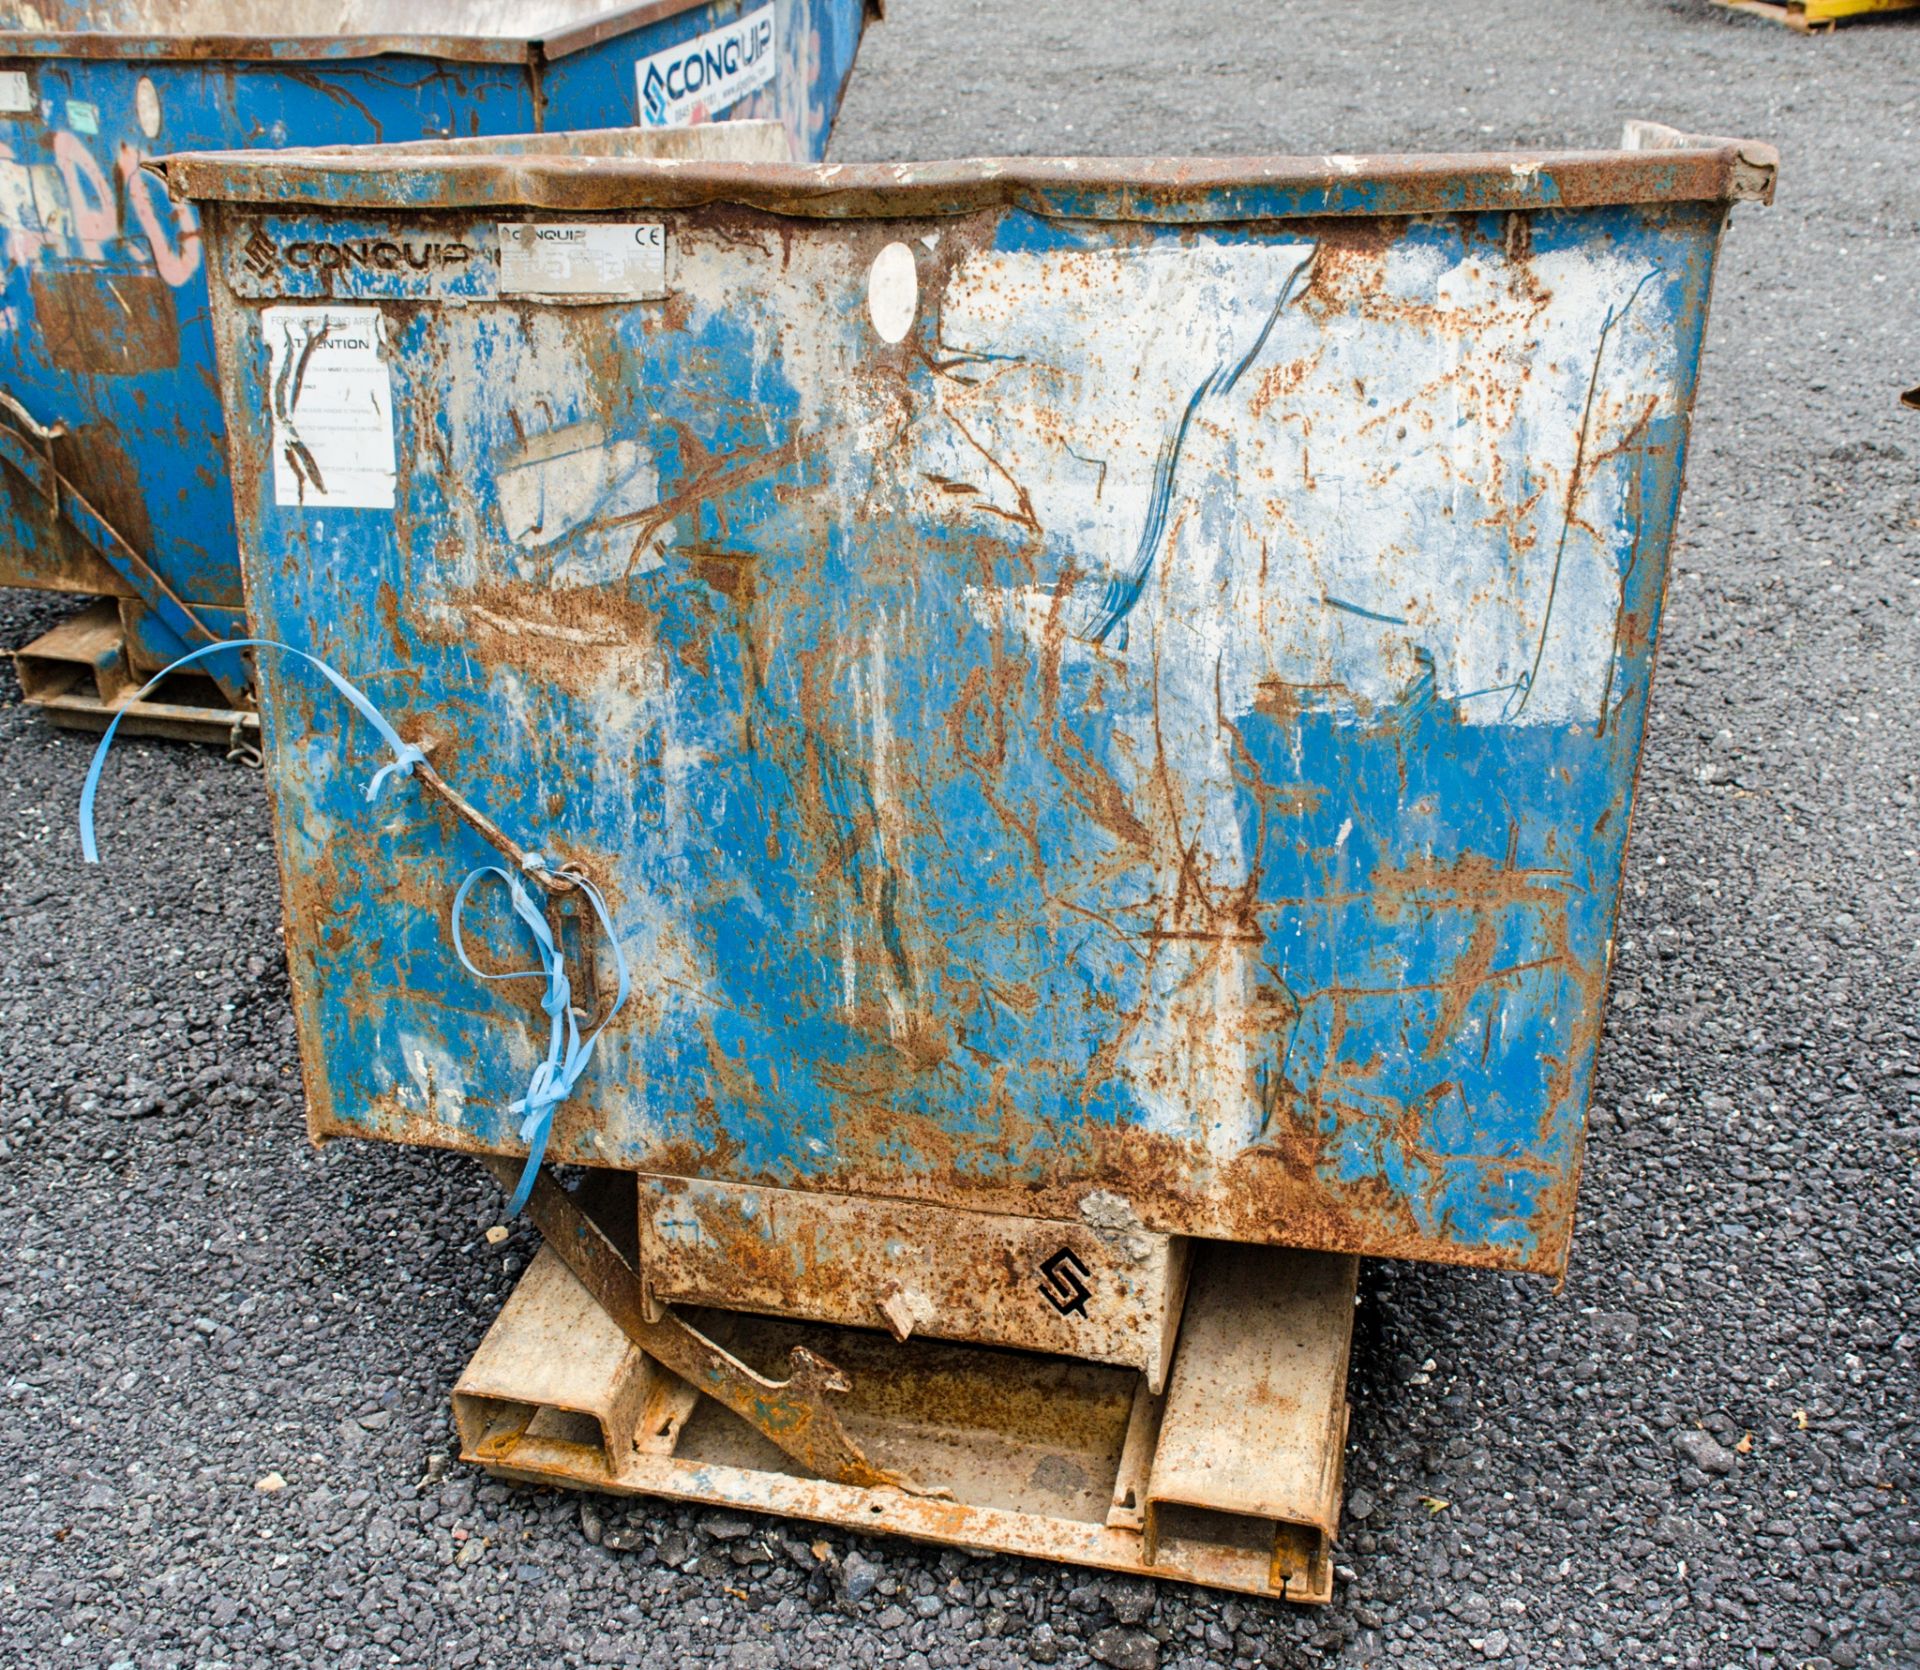 Conquip tipping skip - Image 2 of 2